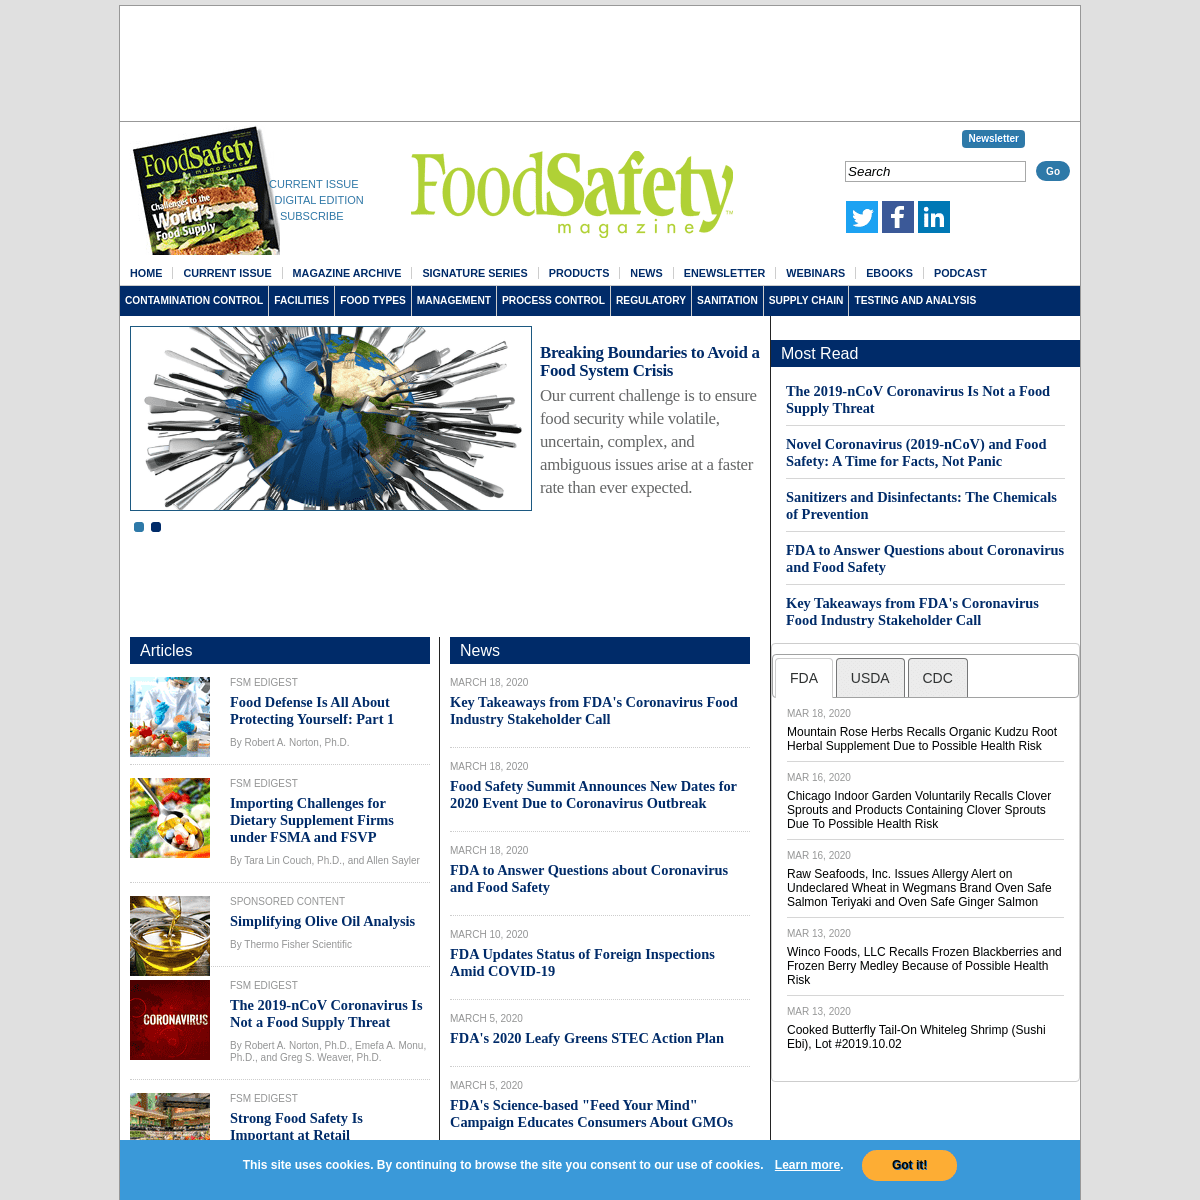 A complete backup of foodsafetymagazine.com